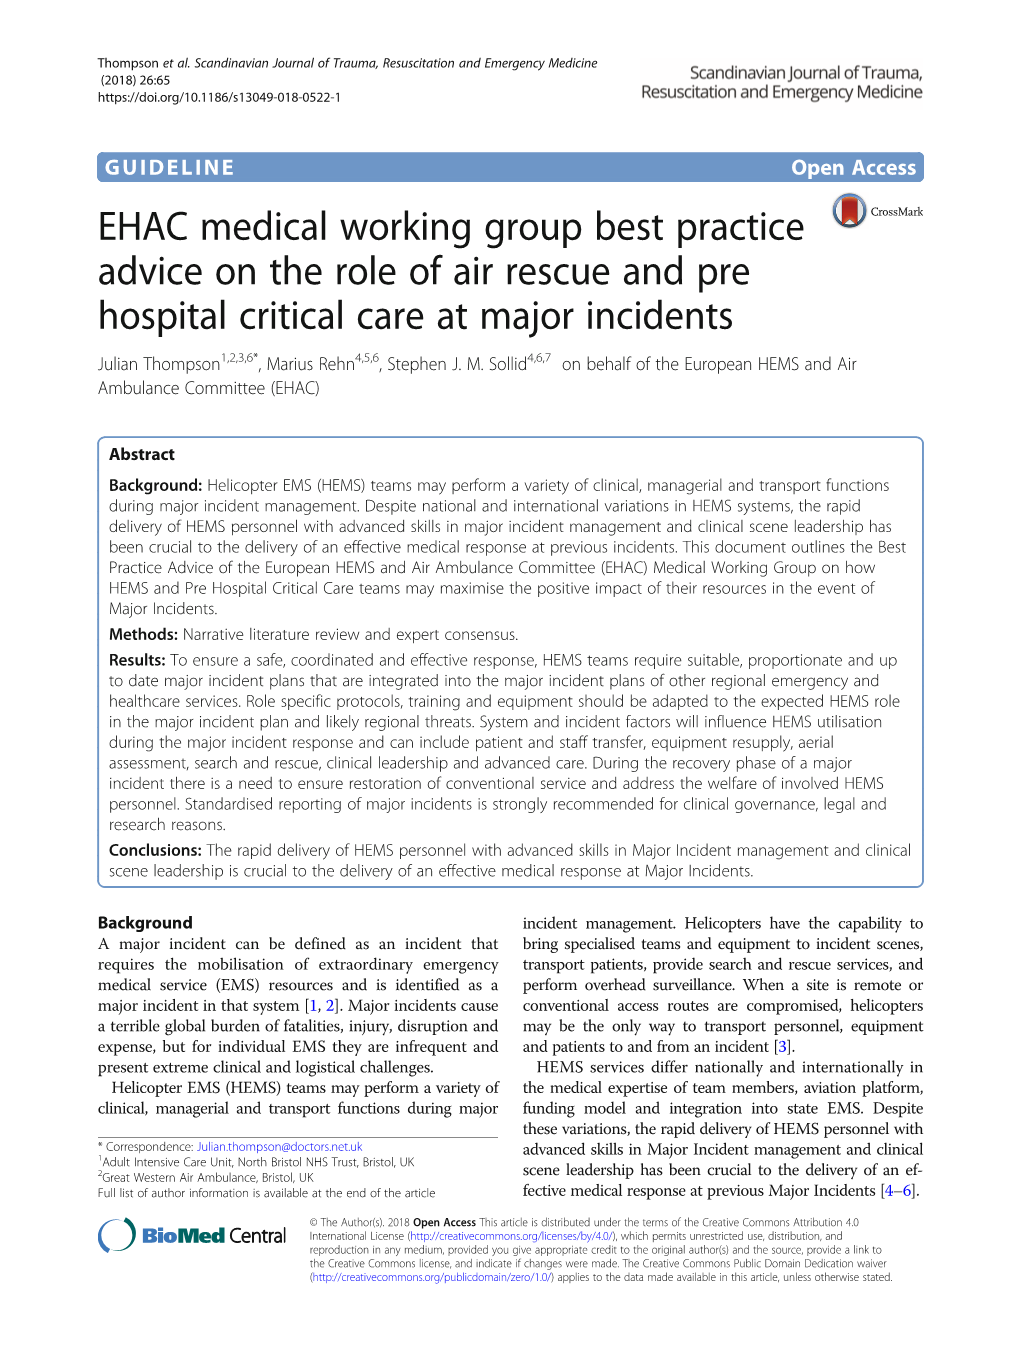 EHAC Medical Working Group Best Practice Advice on the Role of Air